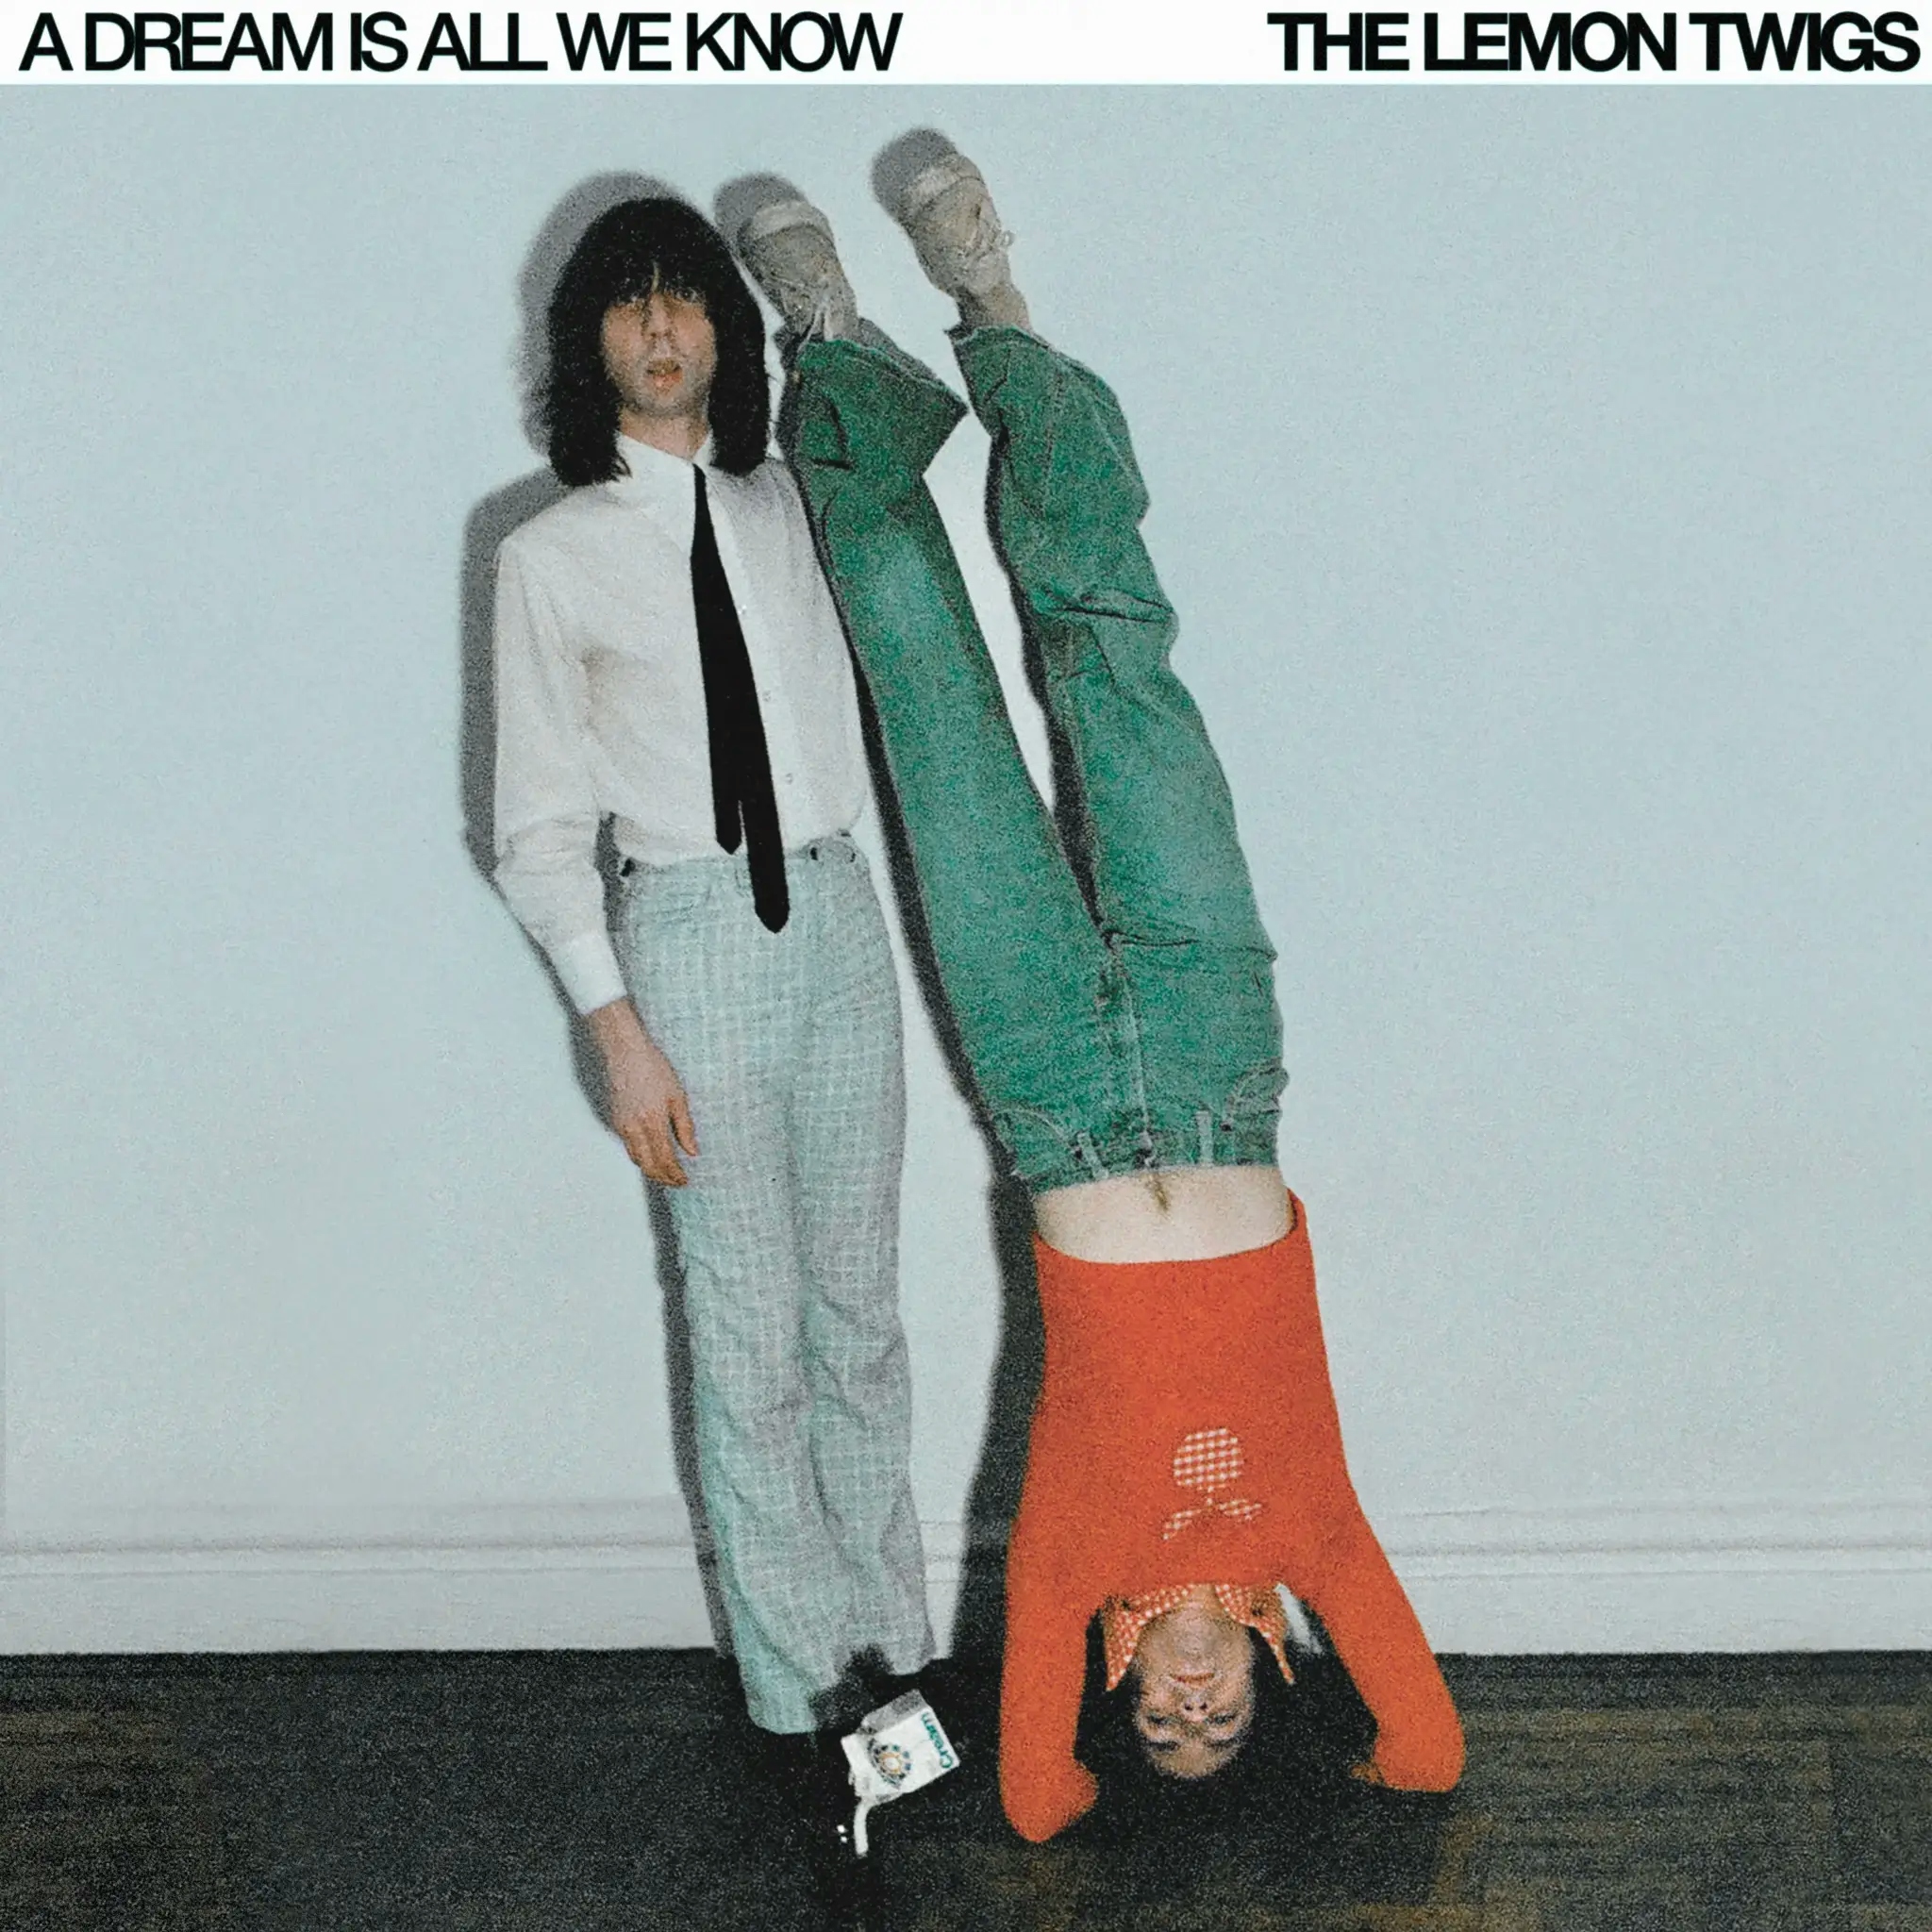 Album artwork for Album artwork for A Dream Is All We Know by The Lemon Twigs by A Dream Is All We Know - The Lemon Twigs